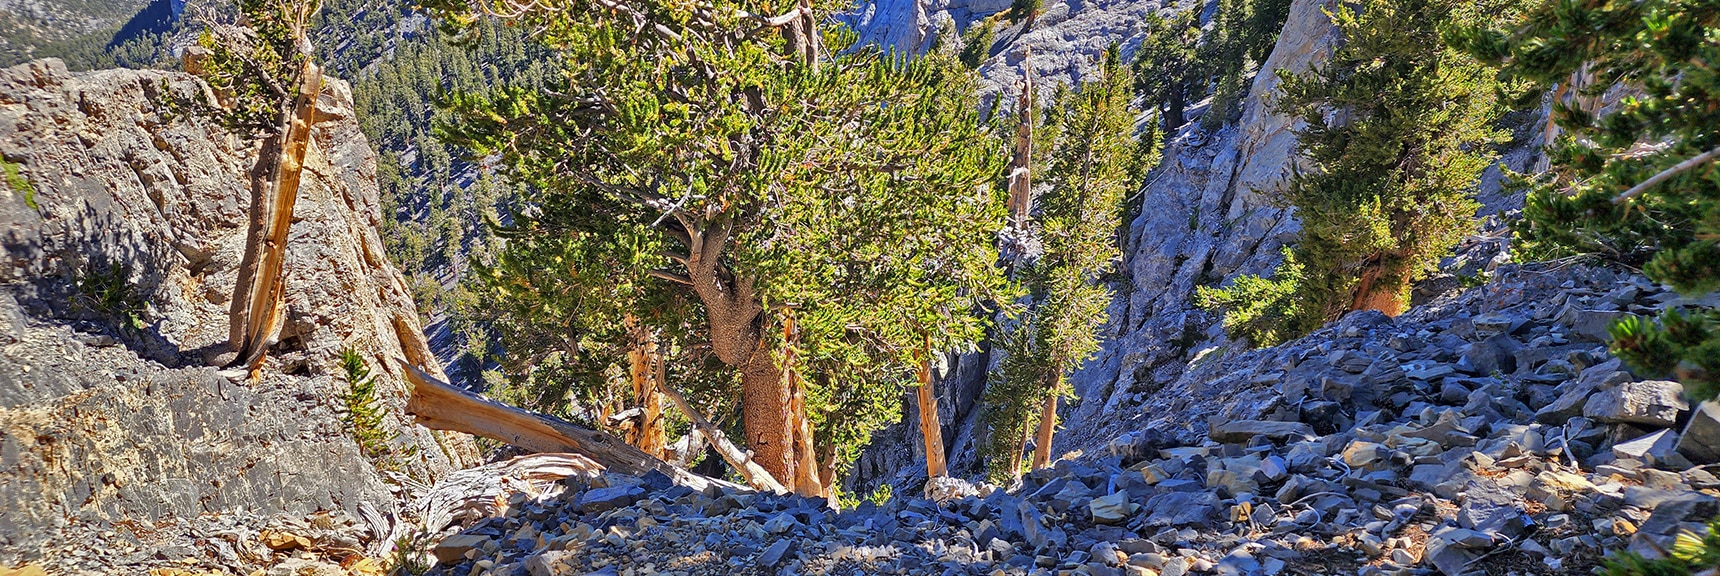 View Down the Descent "Chute". Loose Rock, Steep Near Vertical Cliff Slope. | Mummy Mountain Grand Crossing | Lee Canyon to Deer Creek Road | Mt Charleston Wilderness | Spring Mountains, Nevada |